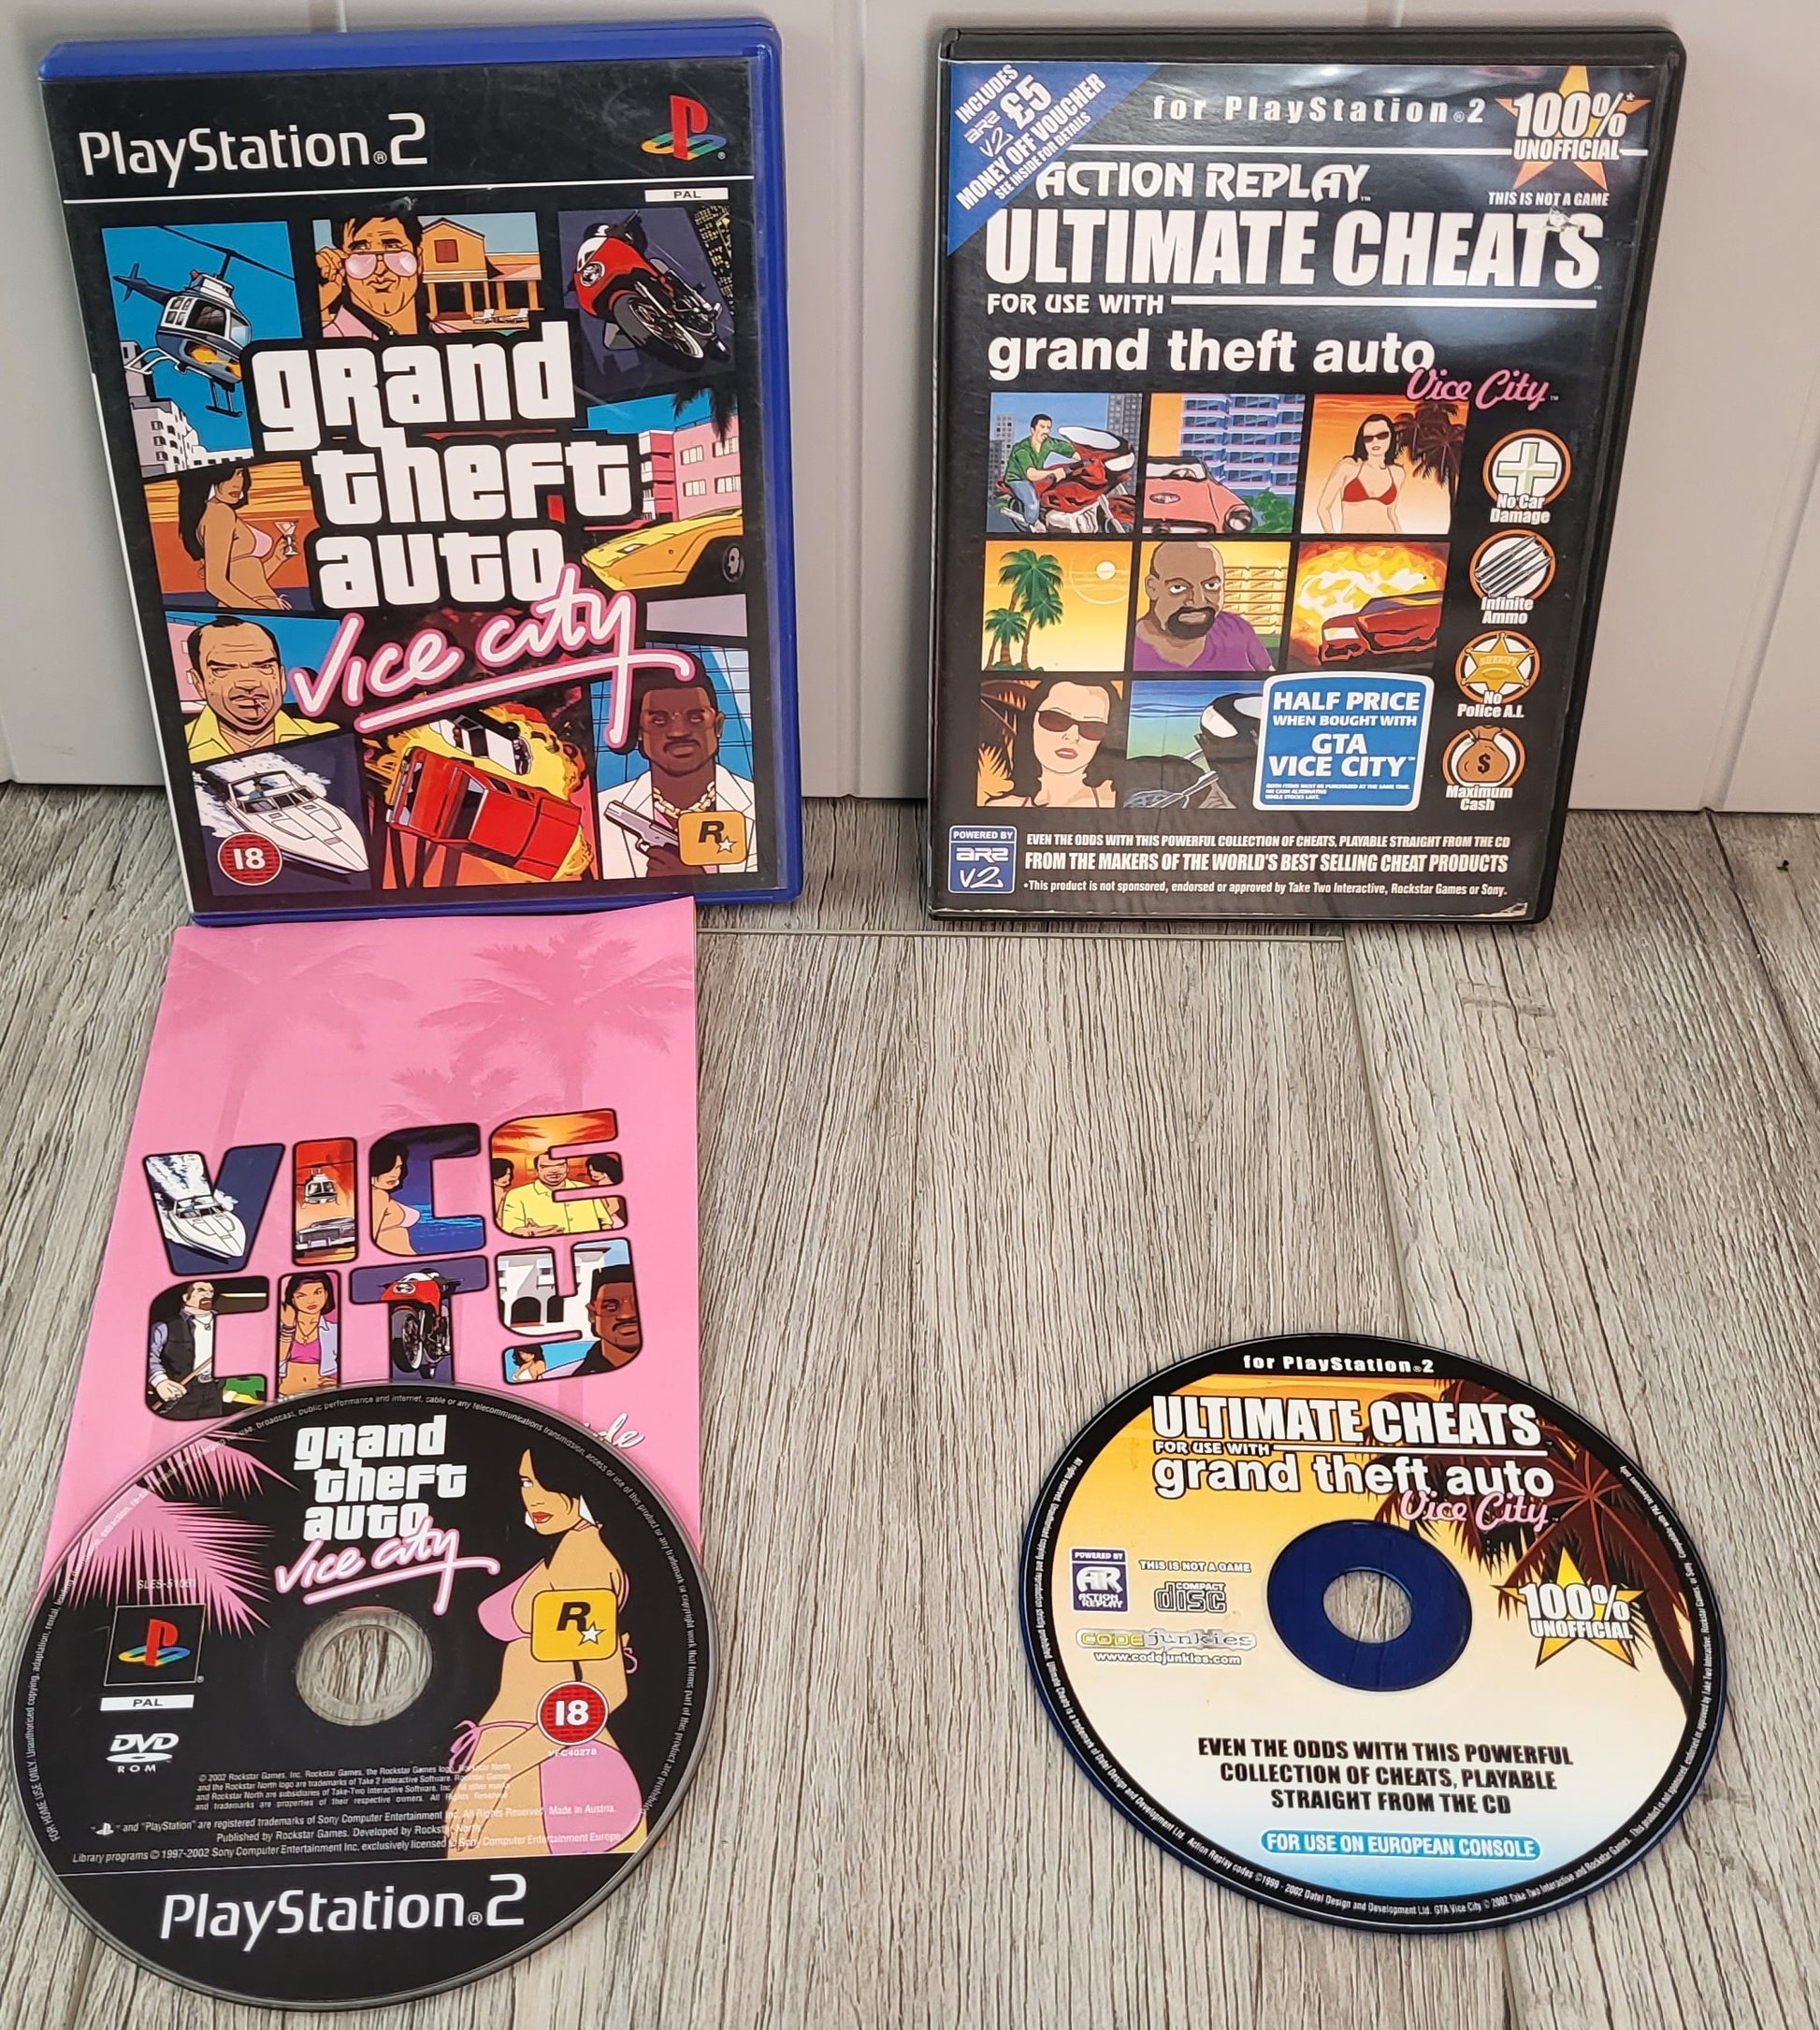 NEW Gameshark 2 Ultimate Cheats For Grand Theft Auto III For Playstation 2  PS2